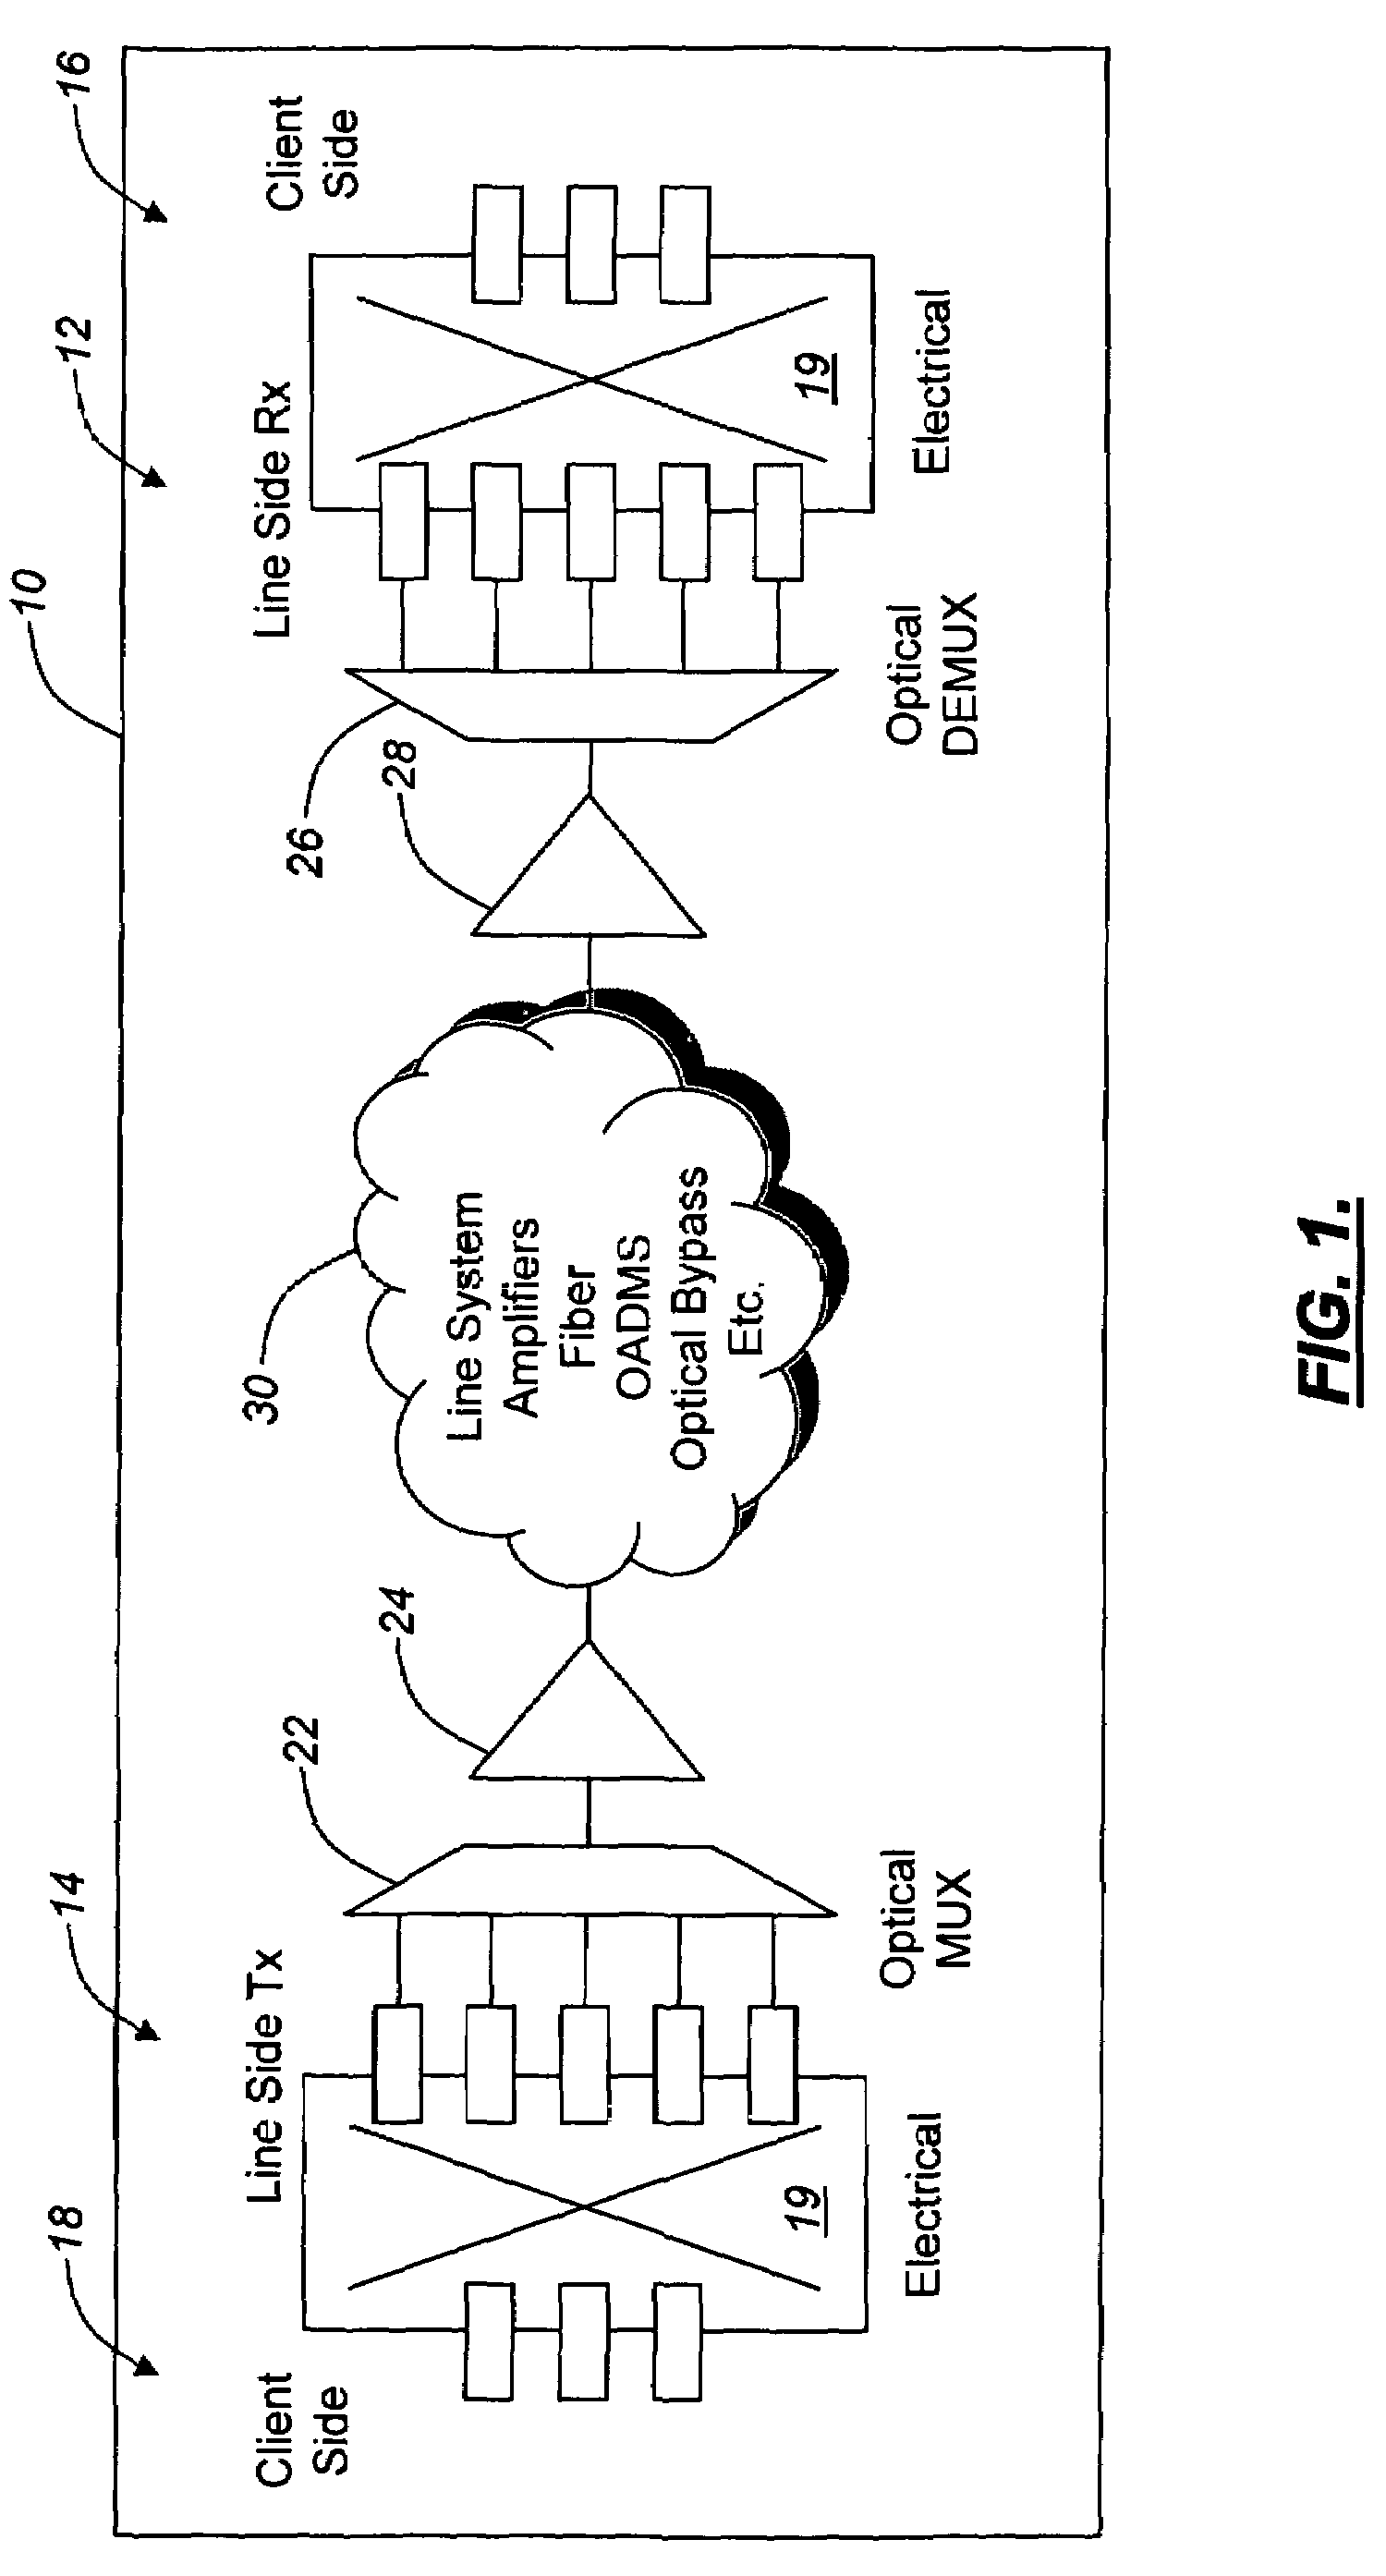 Multi-channel protection switching systems and methods for increased reliability and reduced cost